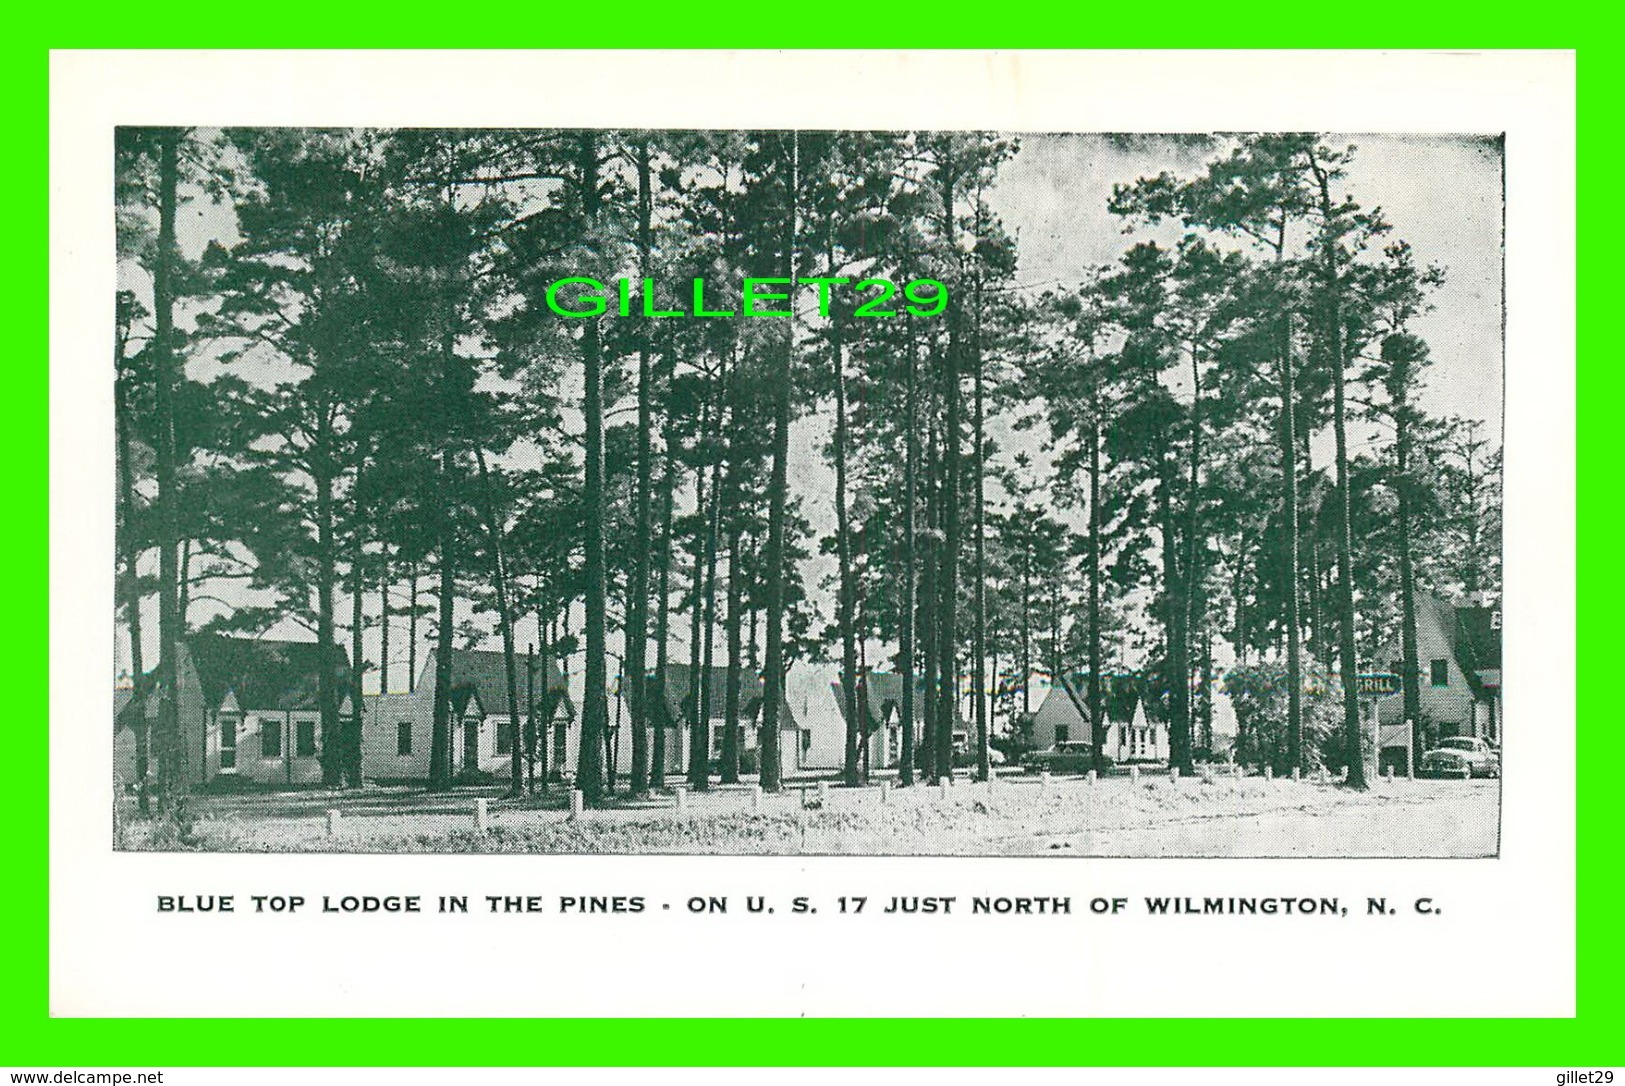 WILMINGTON, NC - BLUE TOP LODGE & COTTAGES IN THE PINES ON U.S. 17 - - Wilmington